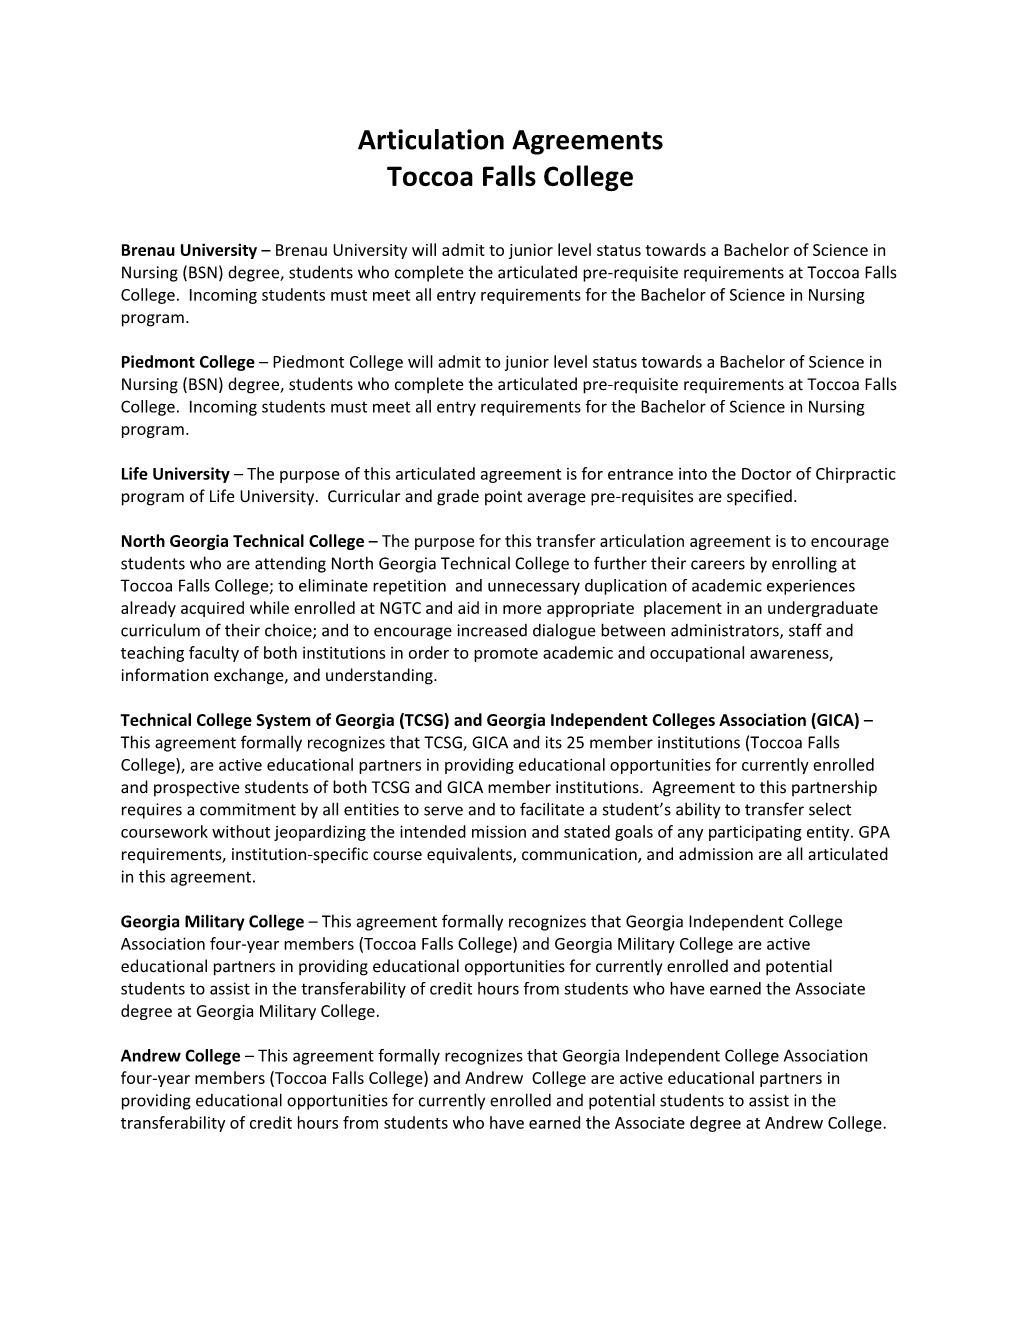 Articulation Agreements Toccoa Falls College